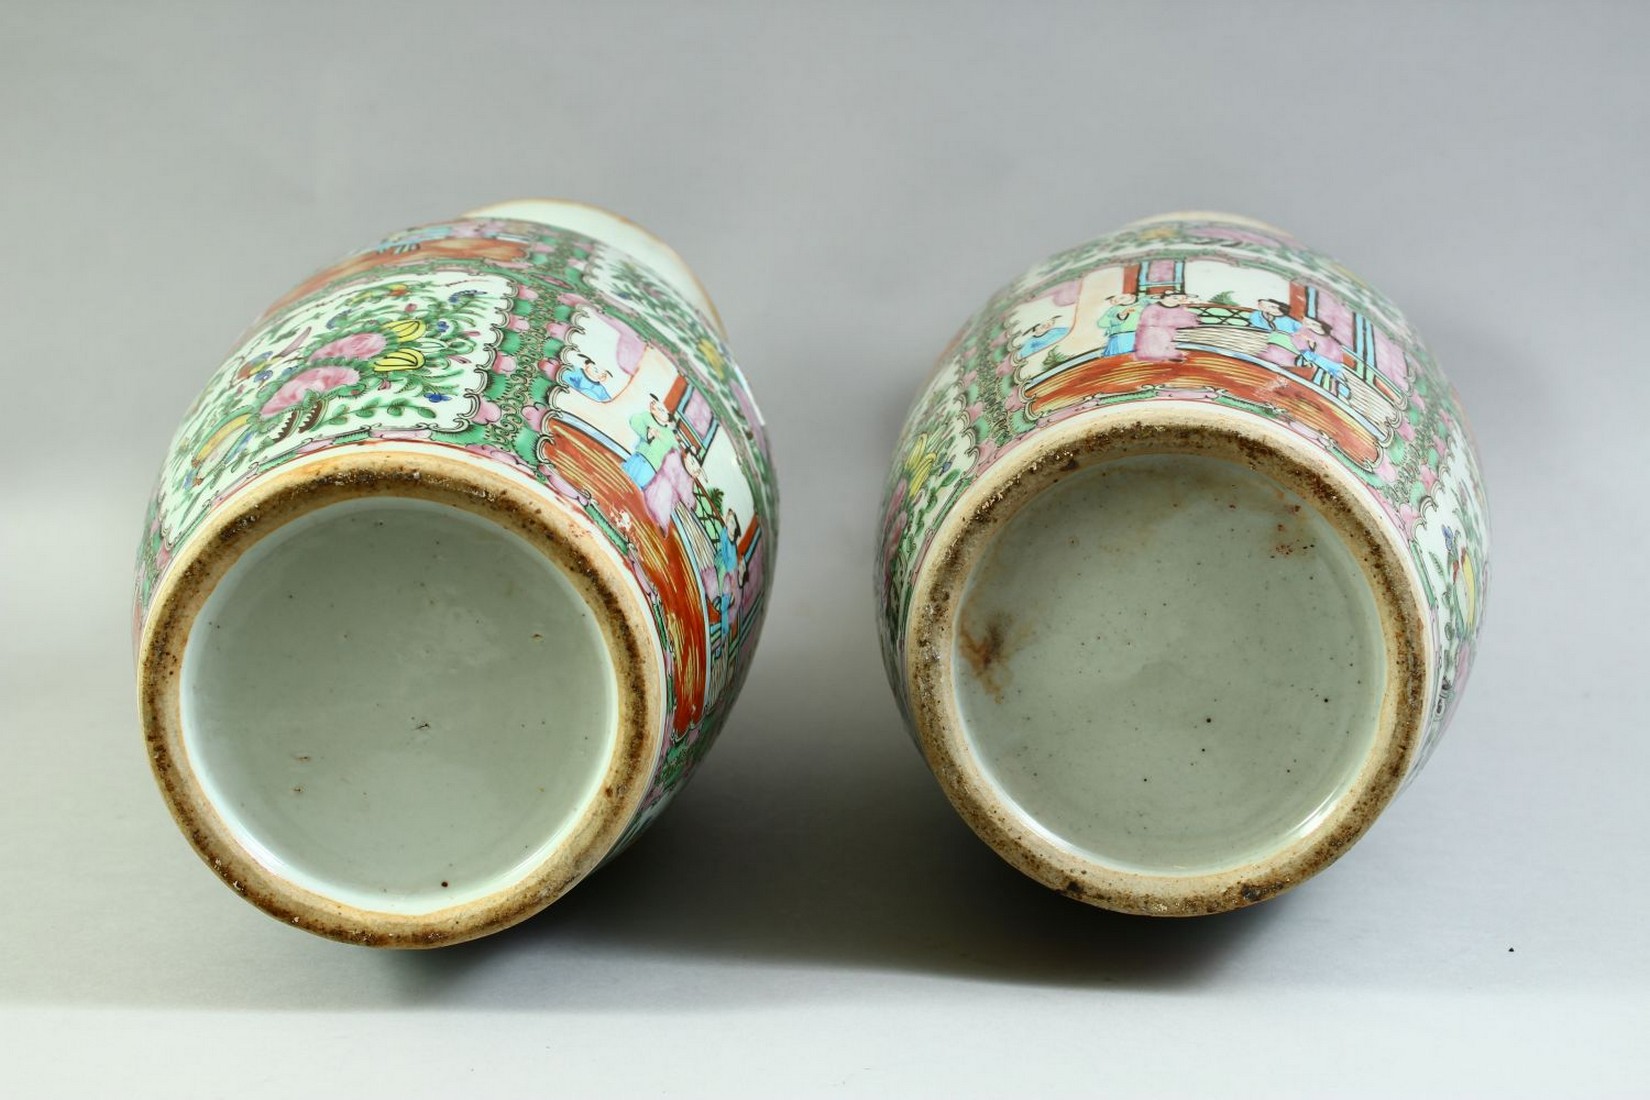 A PAIR OF CHINESE CANTON FAMILLE ROSE PORCELAIN VASES, the body of each painted with panels of - Image 7 of 7